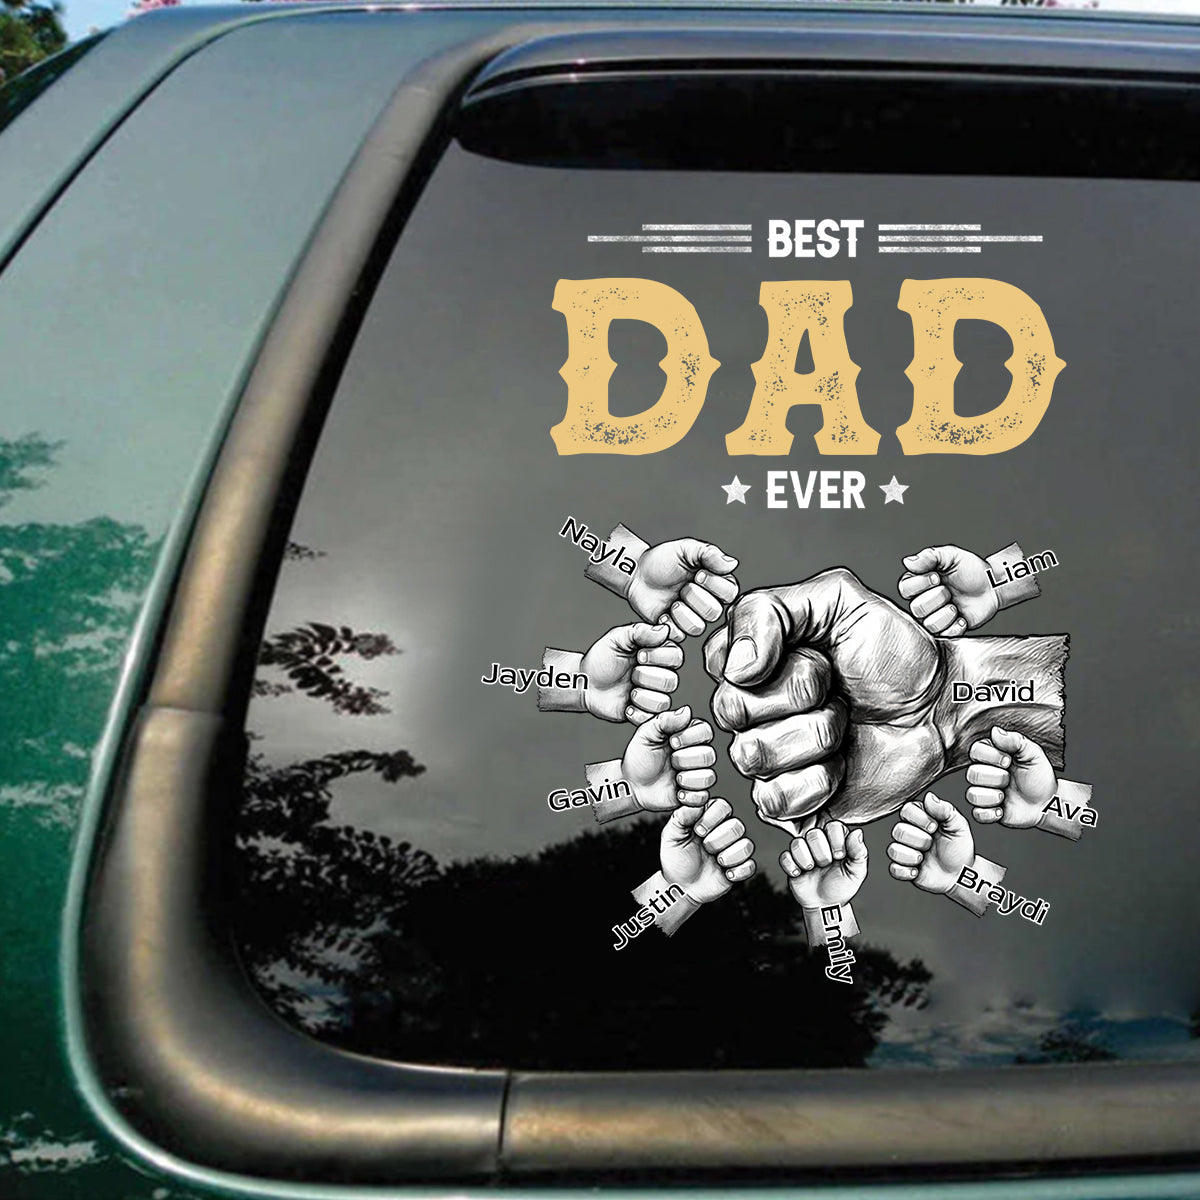 Personalized Best Dad/Mom Ever Fist Bump Decal